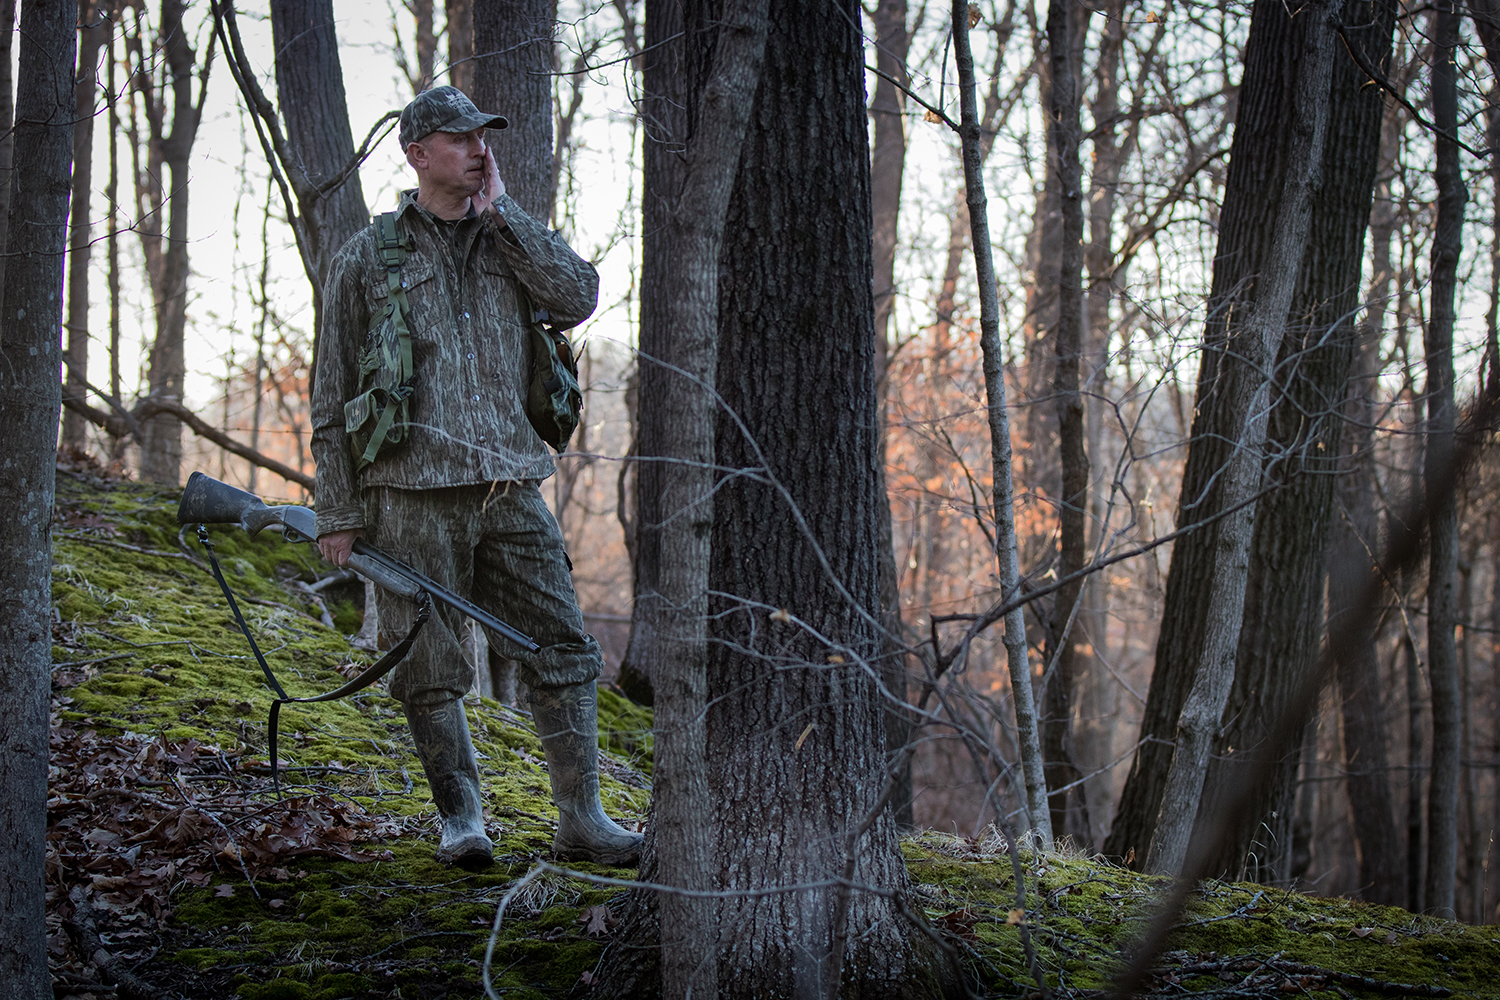 Hunter calling a turkey in the woods.